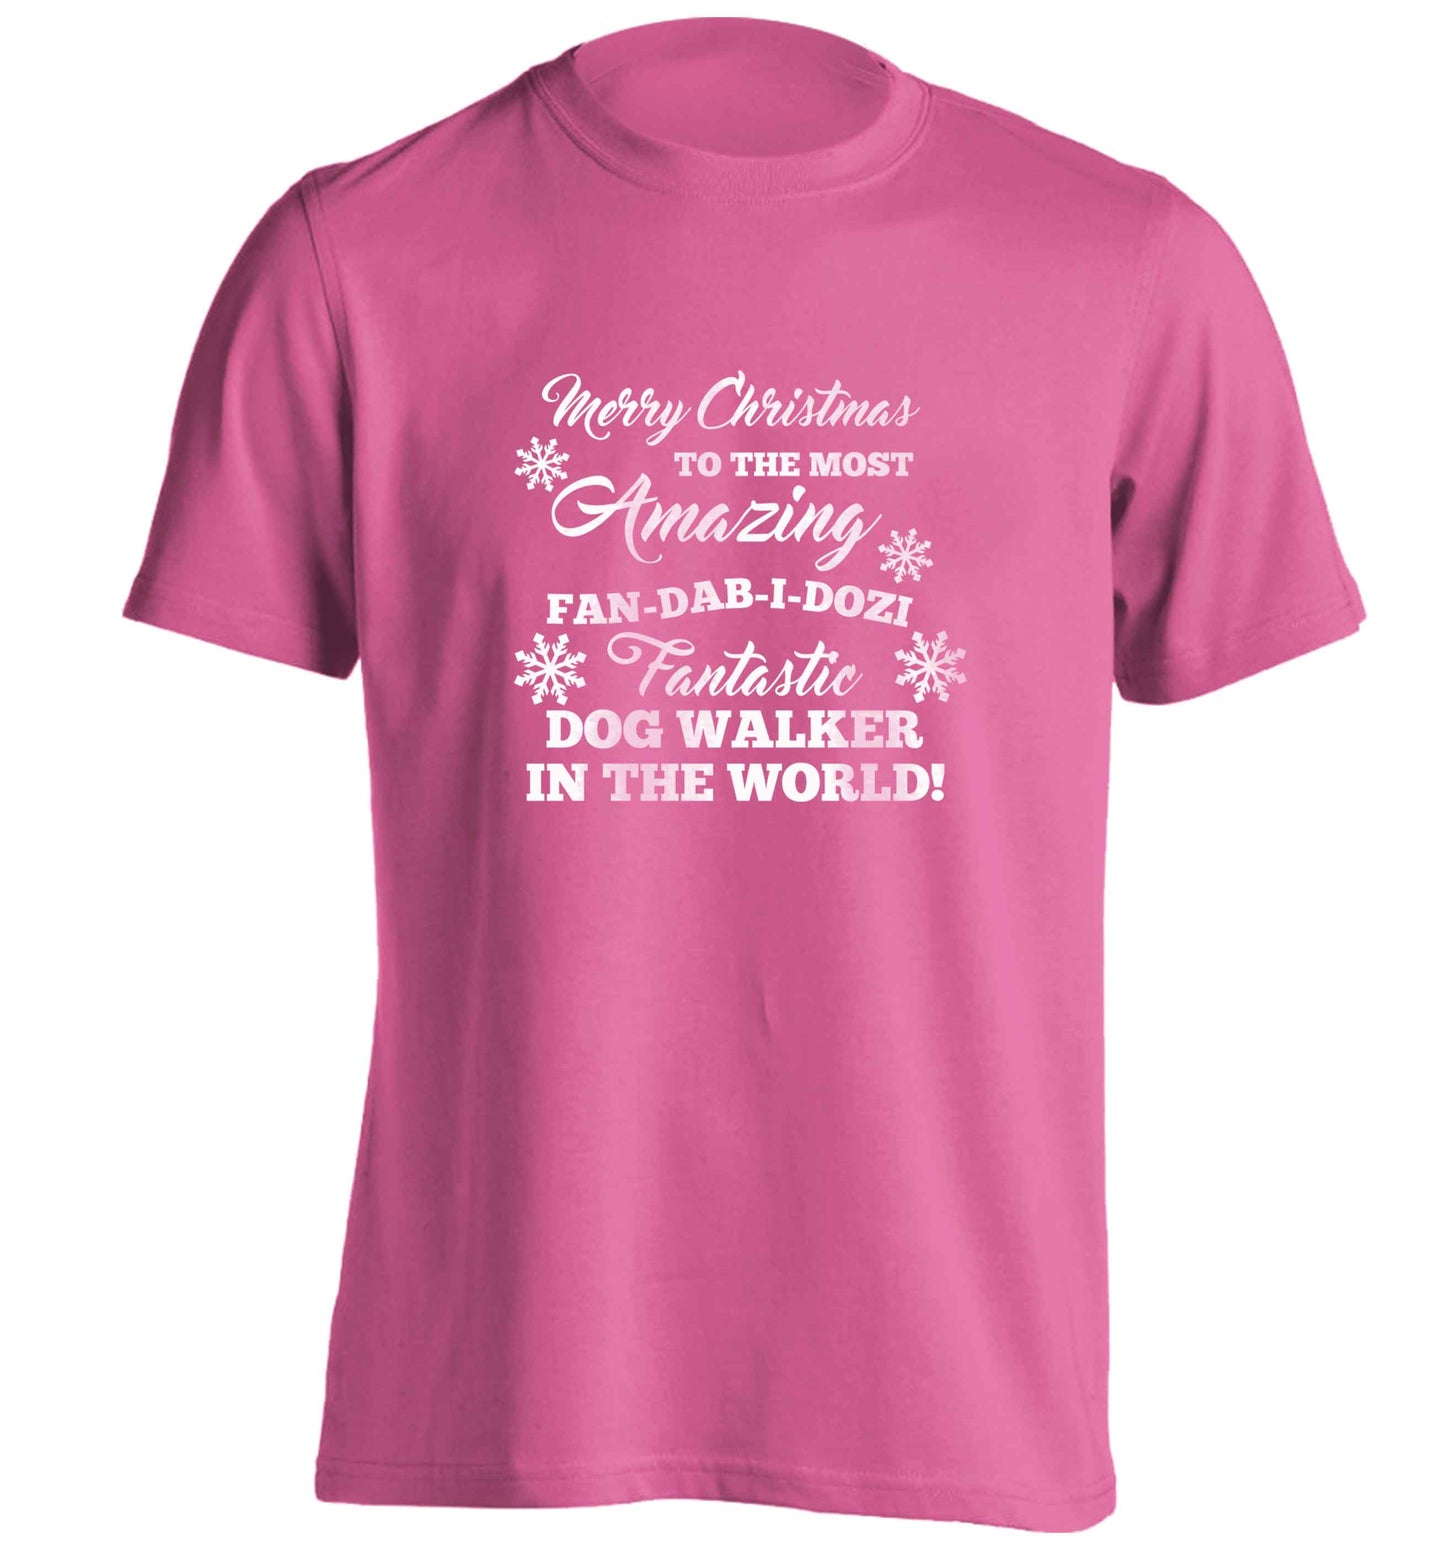 Merry Christmas to the most amazing fan-dab-i-dozi fantasic dog walker in the world adults unisex pink Tshirt 2XL